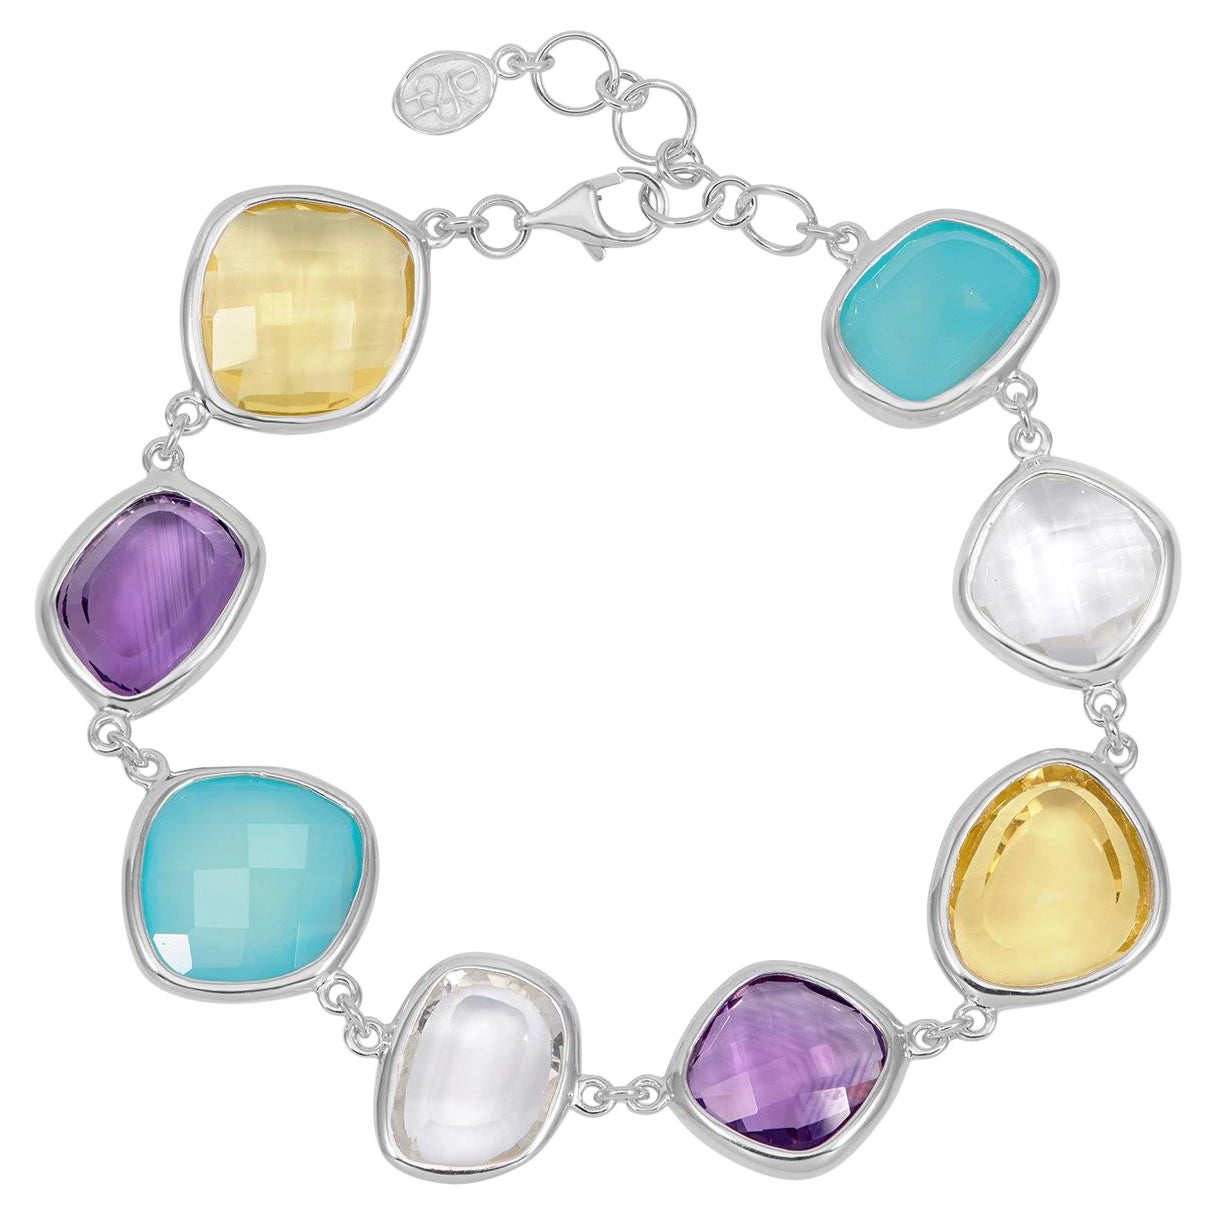 Candy Pebble-Armband aus Sterlingsilber